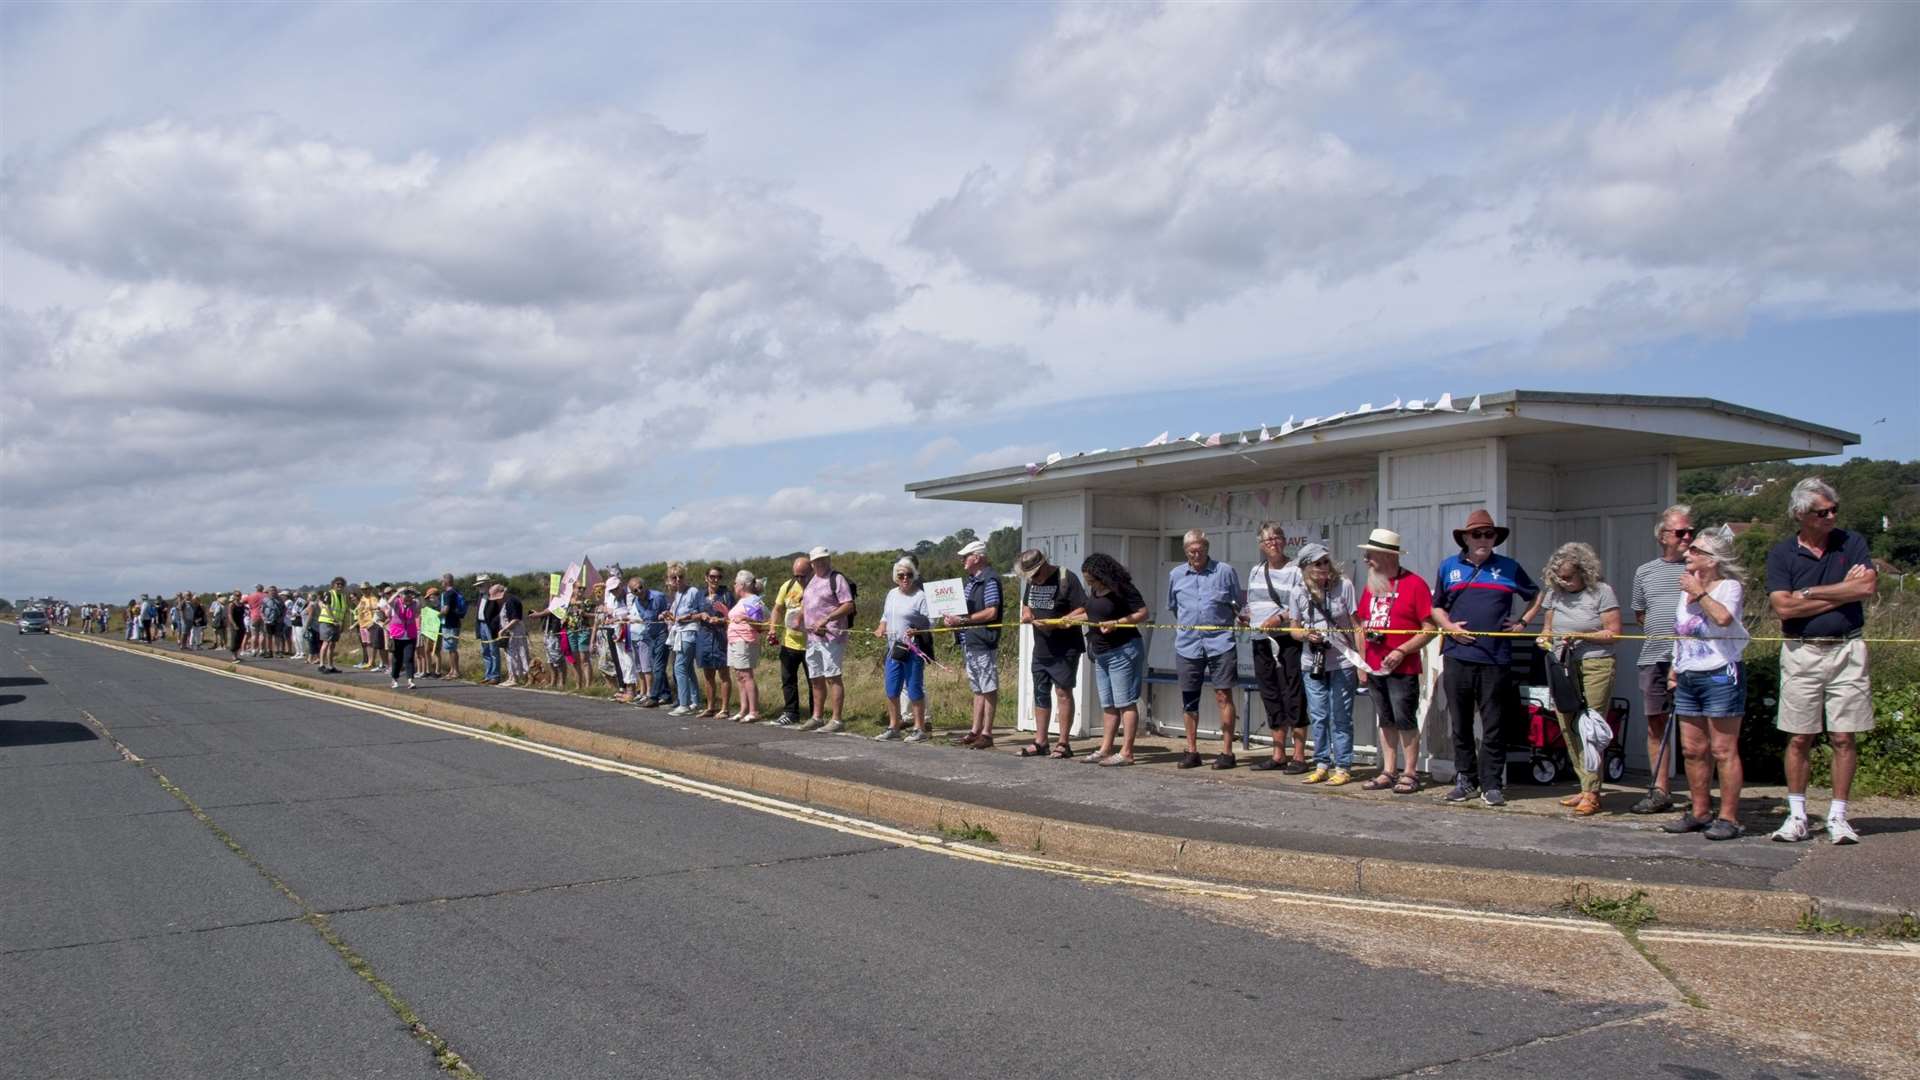 Protesters formed a human chain around the land. All photo: James Willmott